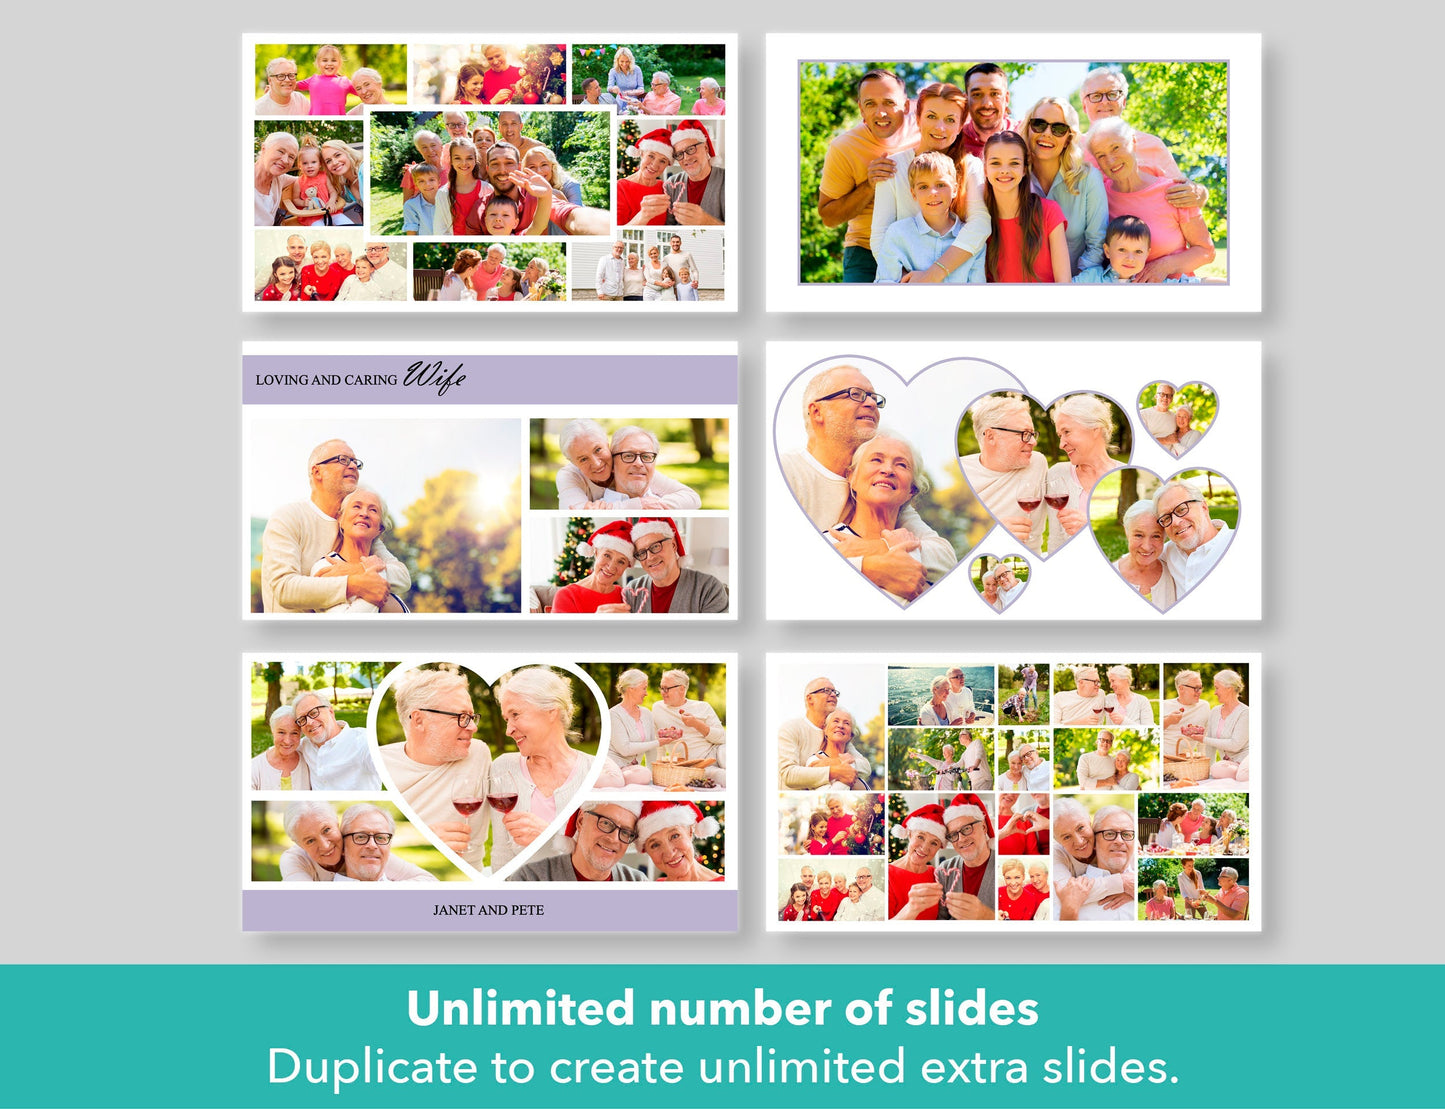 Premium Funeral Slideshow Template with Purple Band